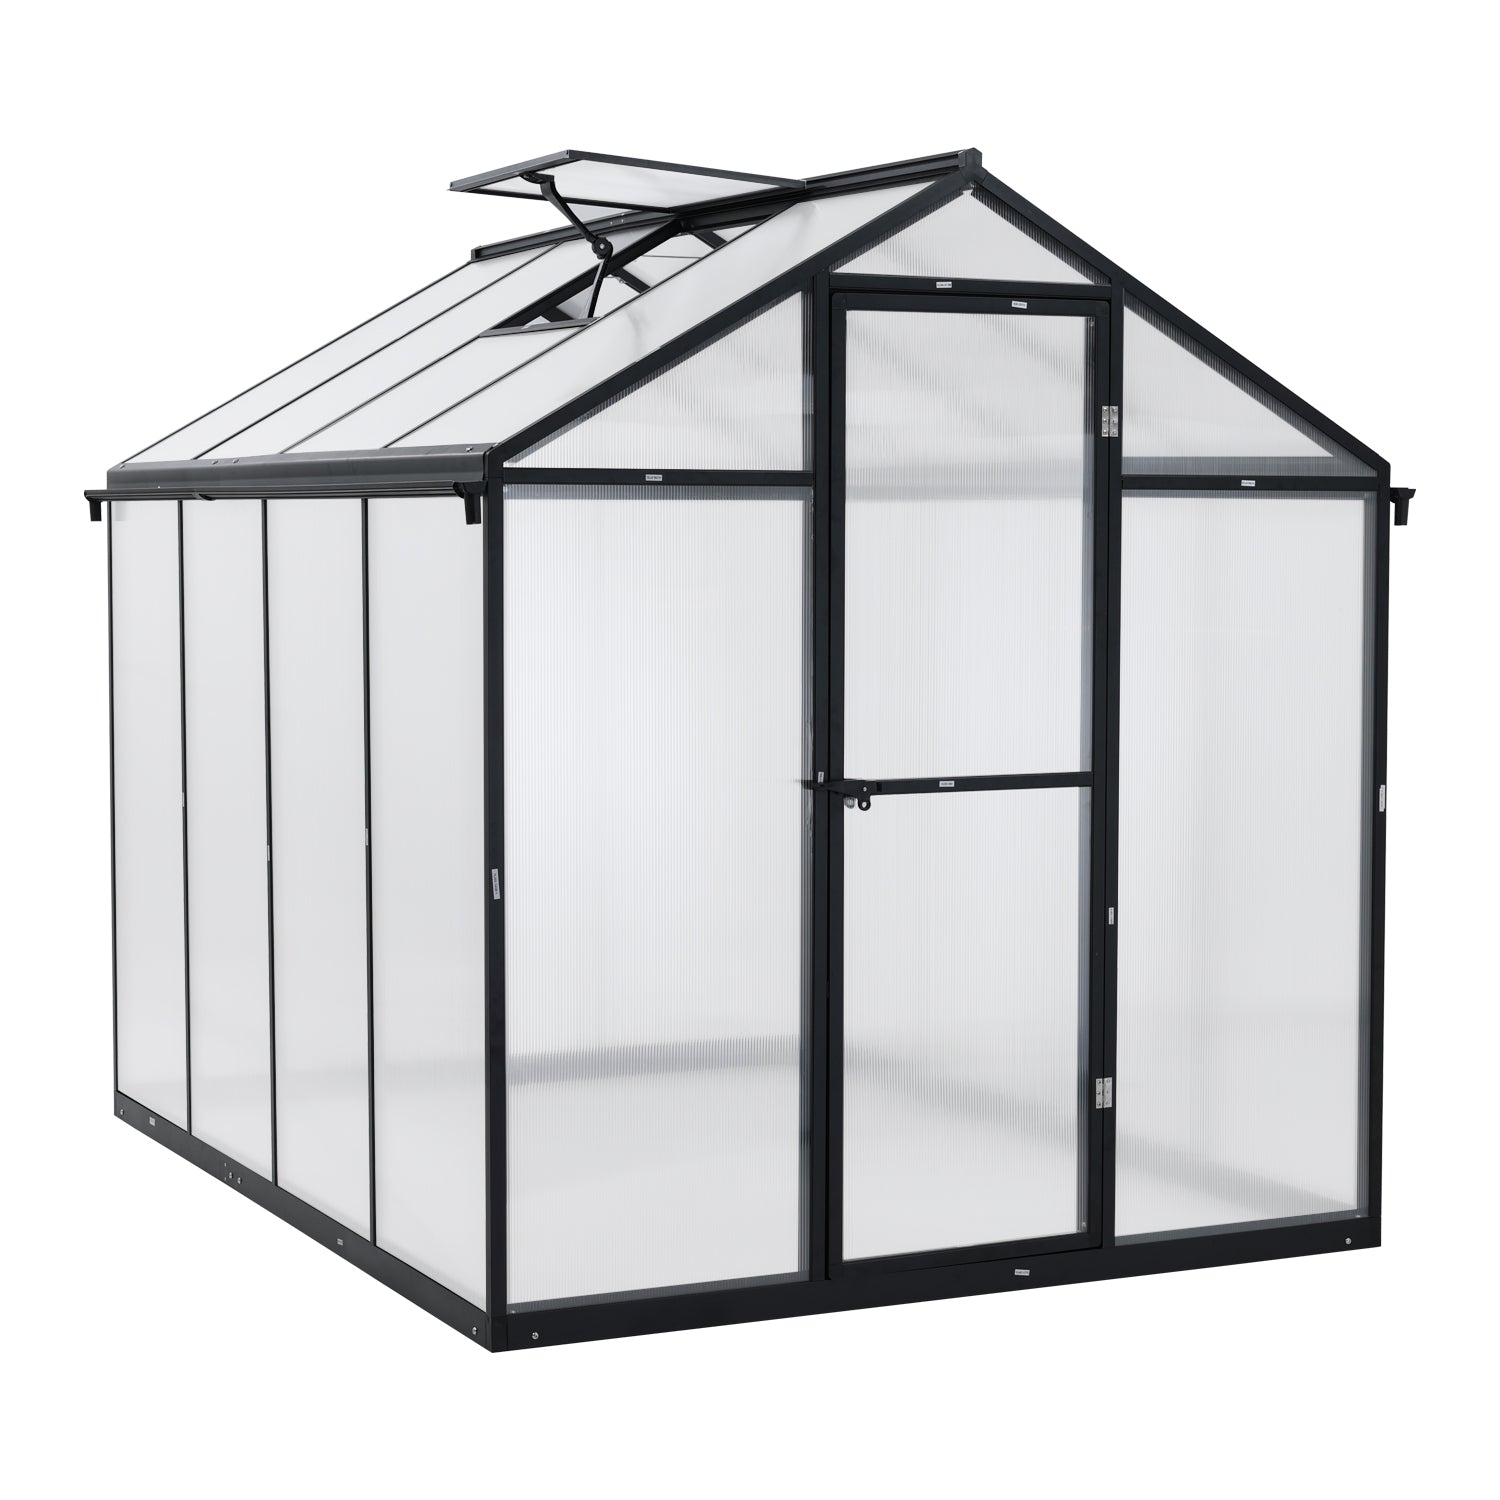 6' x 8' /6' x 10' Walk-in Polycarbonate Greenhouse with Roof Vent and Door lock,  Aluminum Frame and Polycarbonate Panels- White/Black  Aoodor LLC 6' x 8' Black 